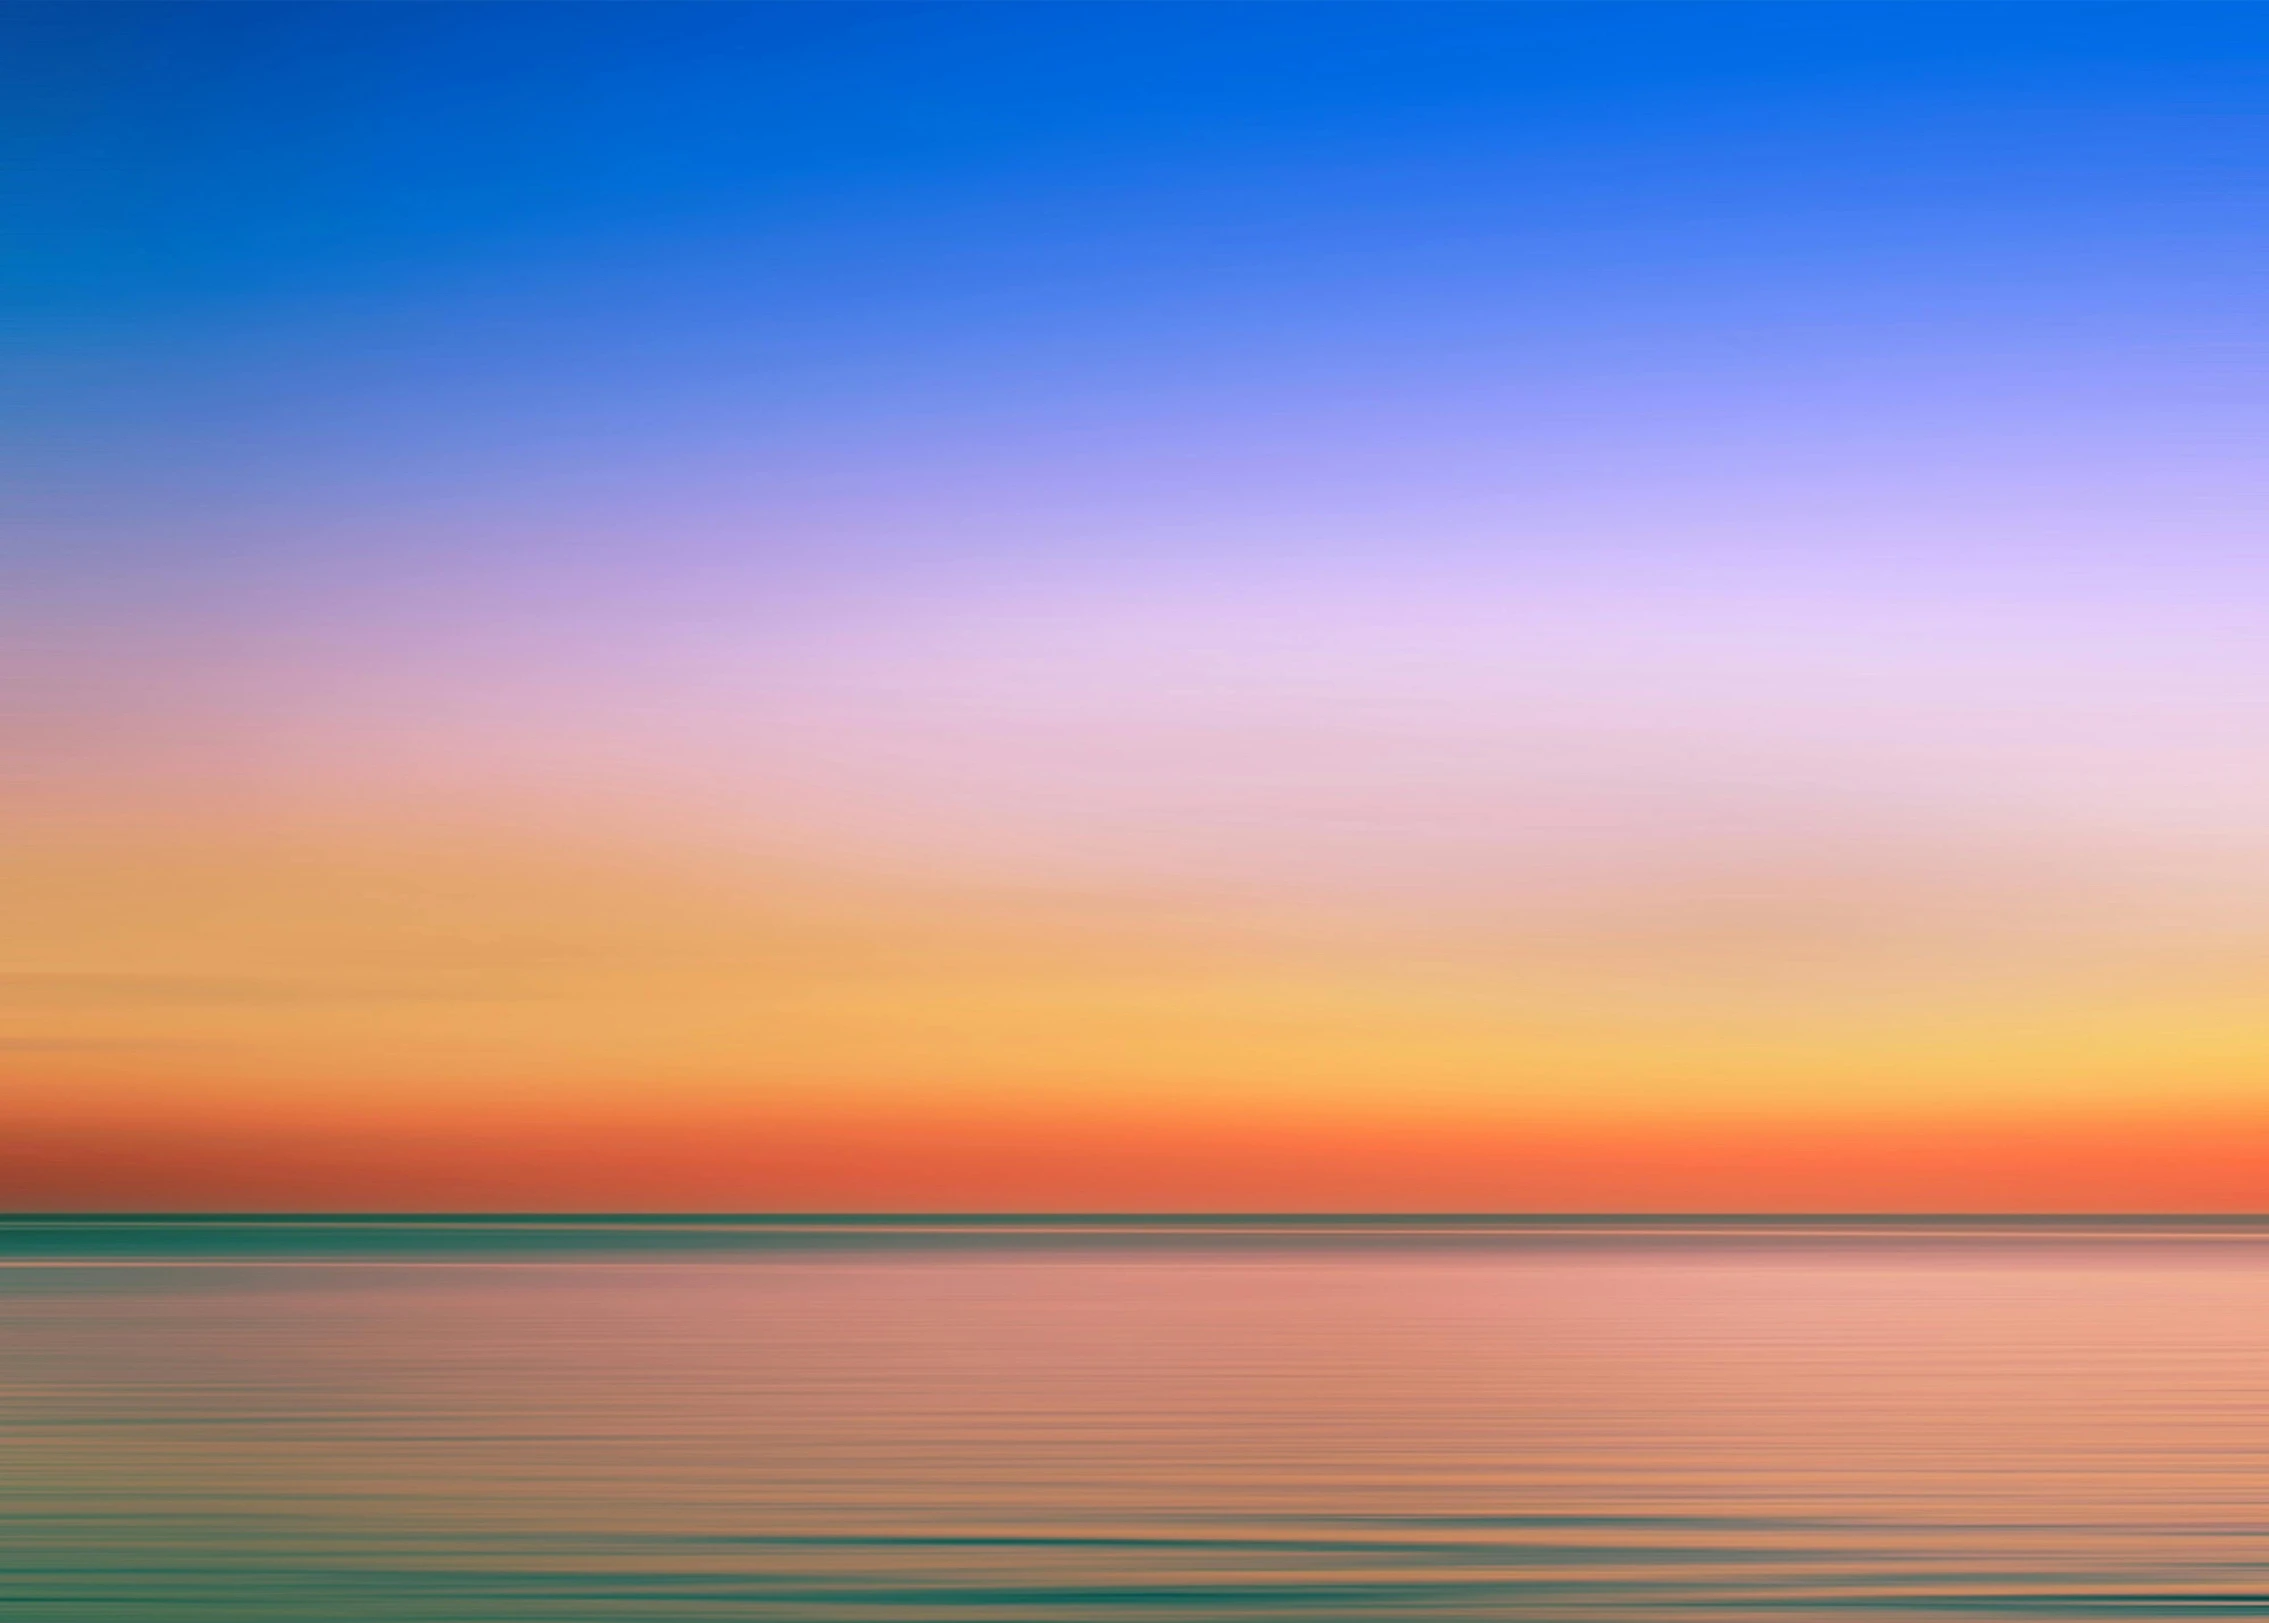 a colorful sky with an ocean in the foreground